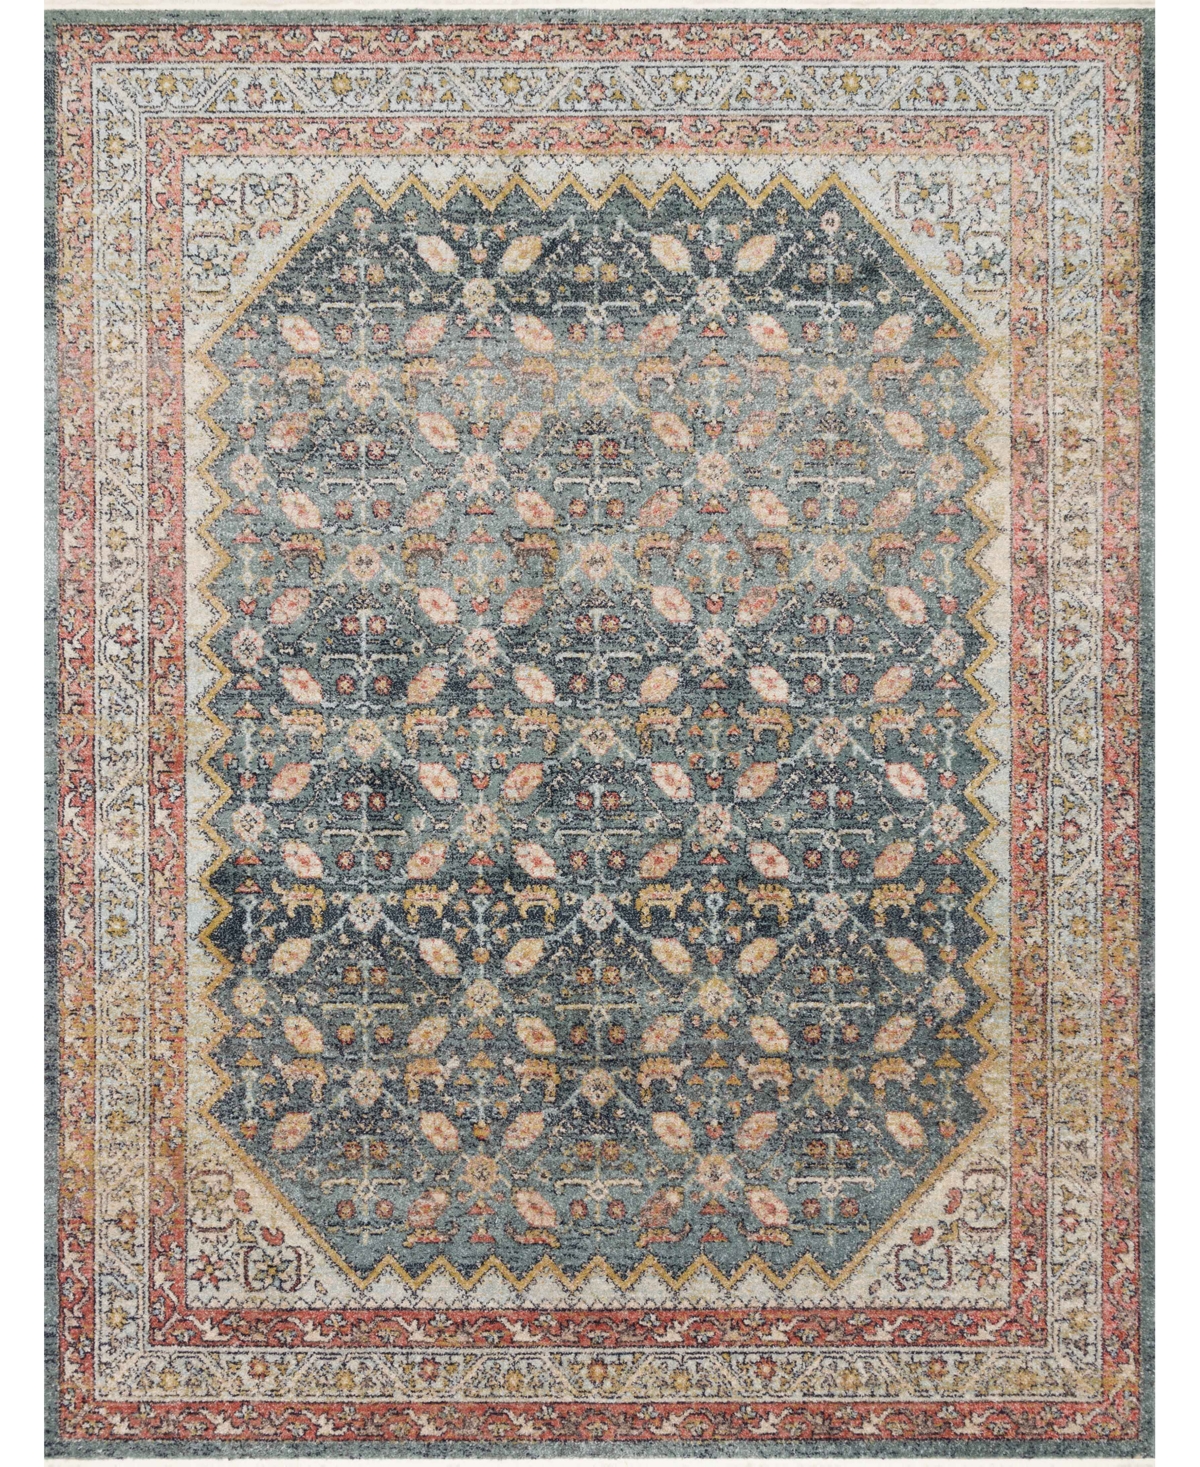 Magnolia Home By Joanna Gaines X Loloi Graham Gra-01 7'10" X 10' Area Rug In Blue